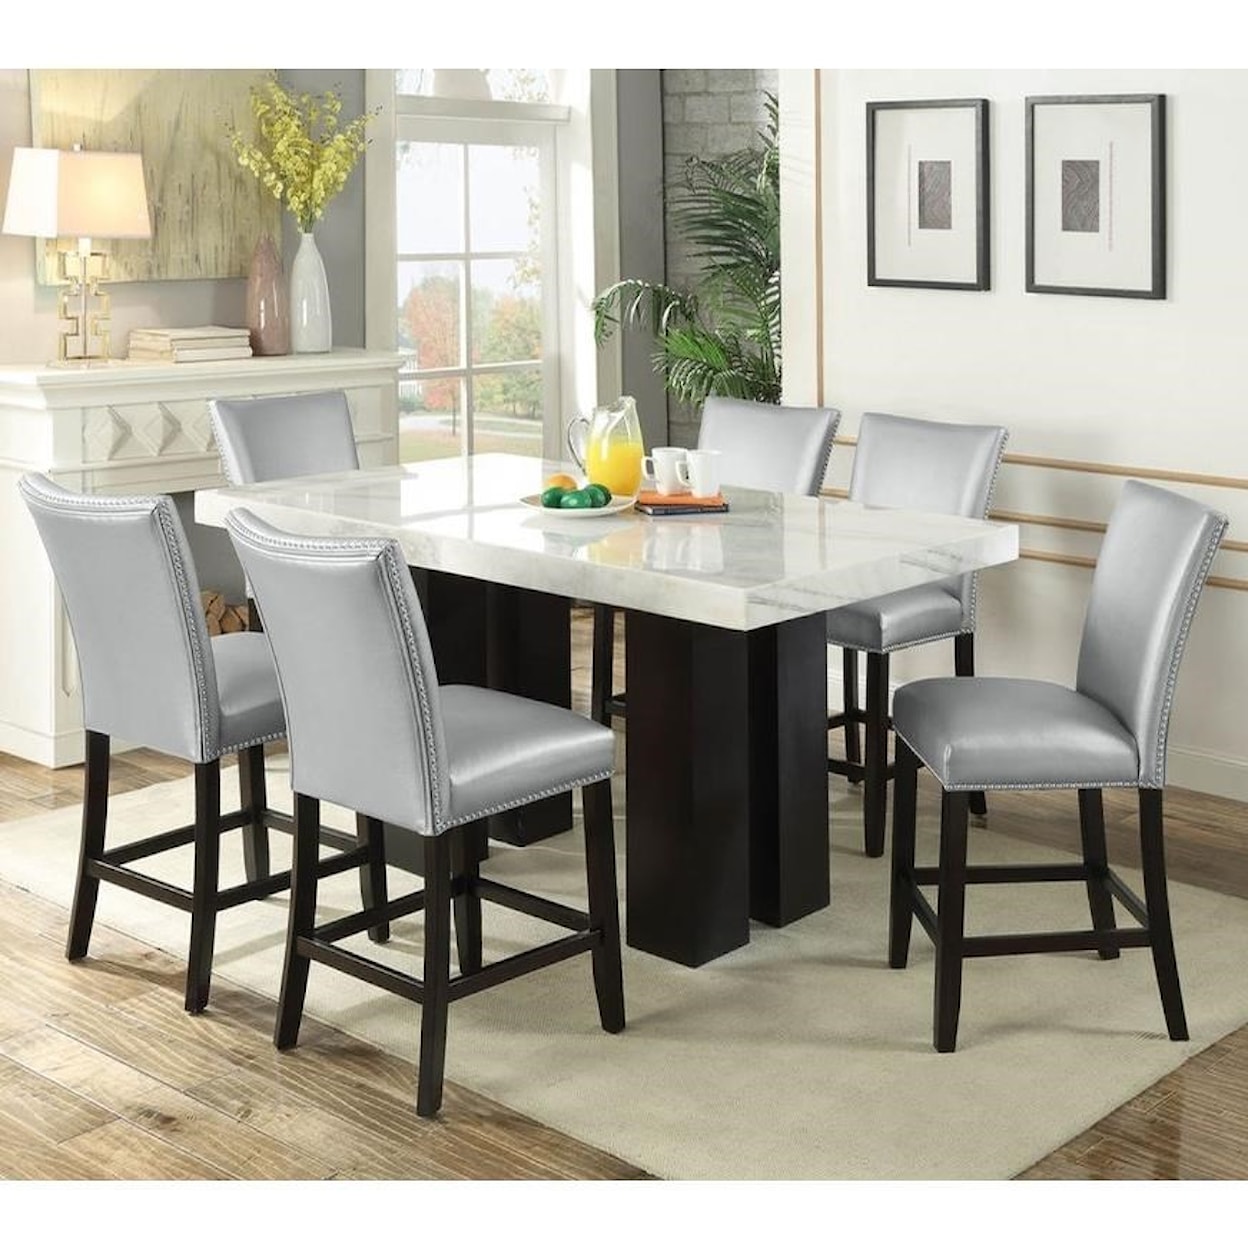 Steve Silver Camila 7 Piece Counter Height Dining Set